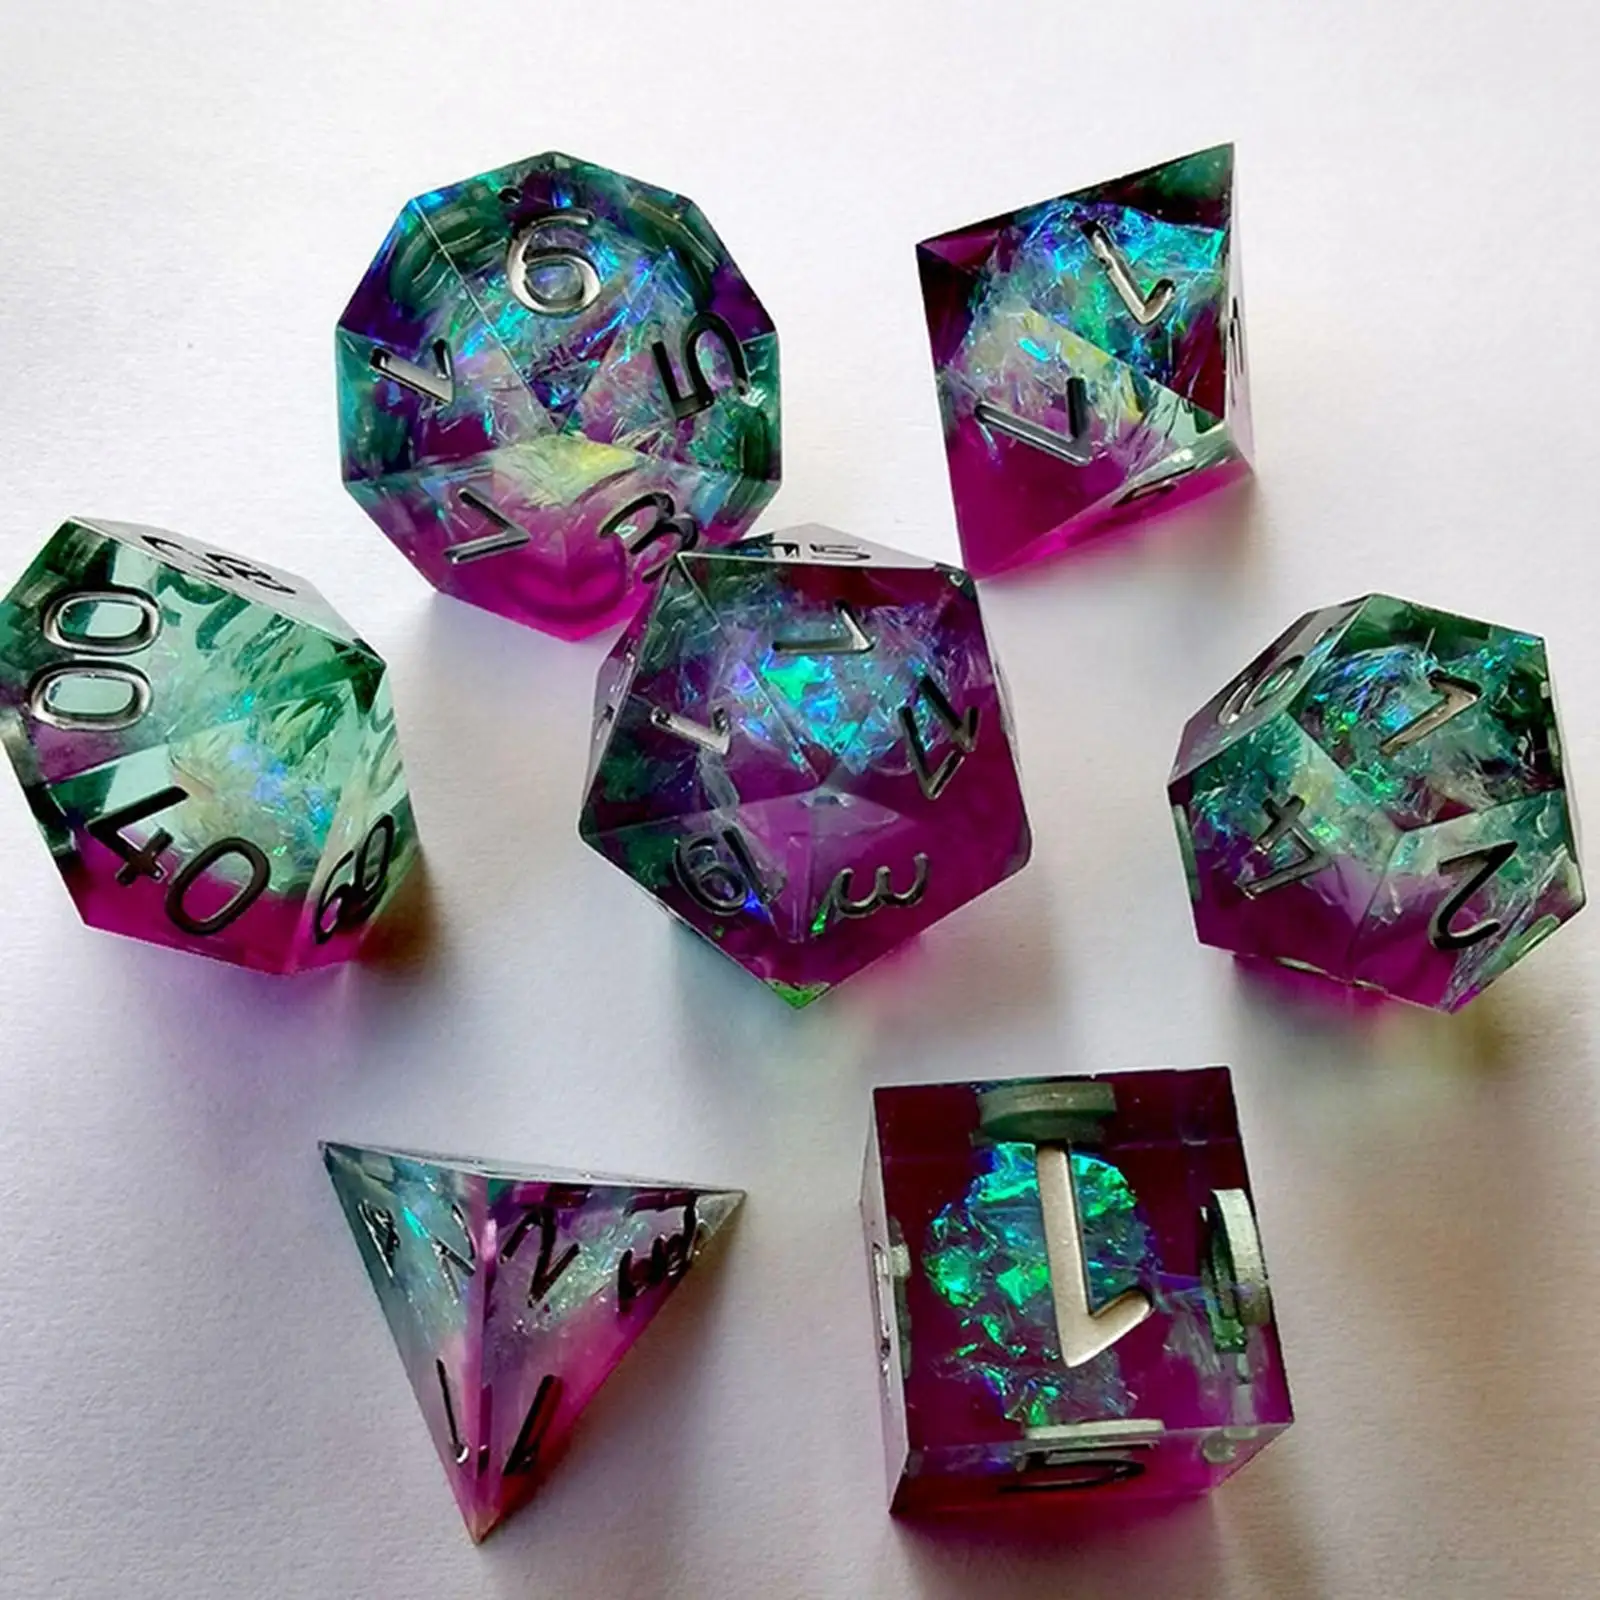 Polyhedral Dice D4 D6 D8 2XD10 D12 D20 with Sharp Edges Beautiful Inclusions for 